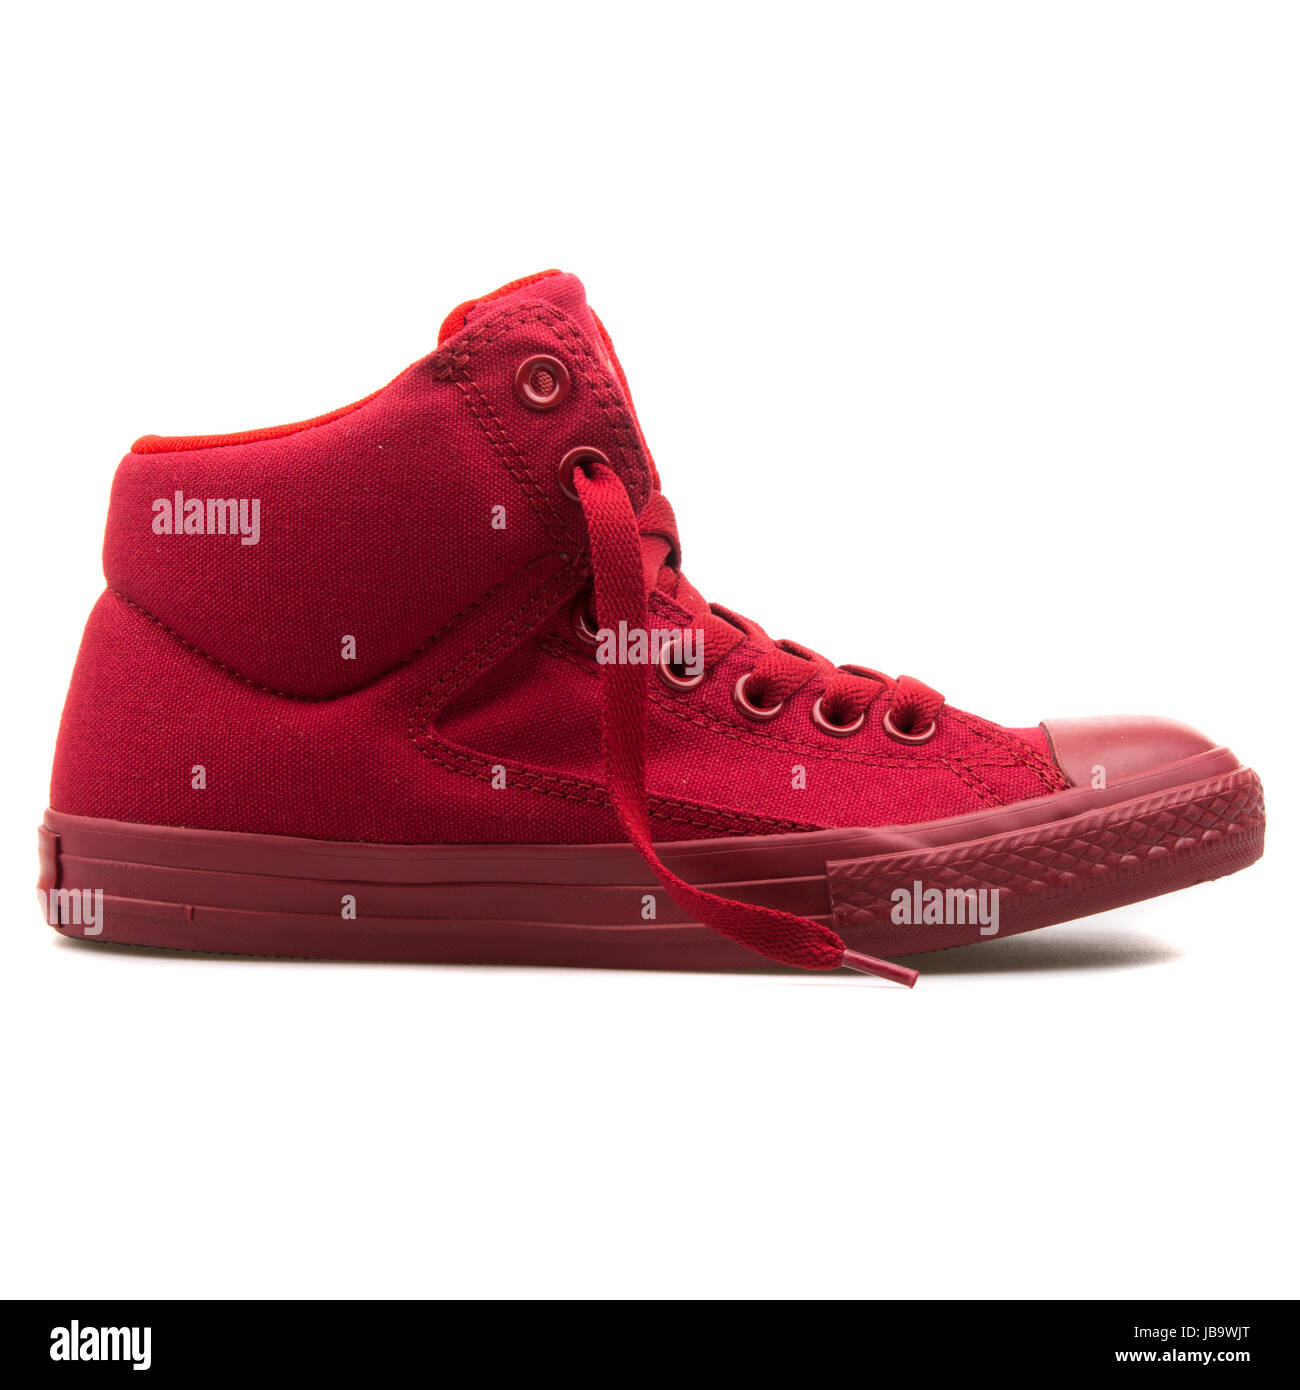 red converses